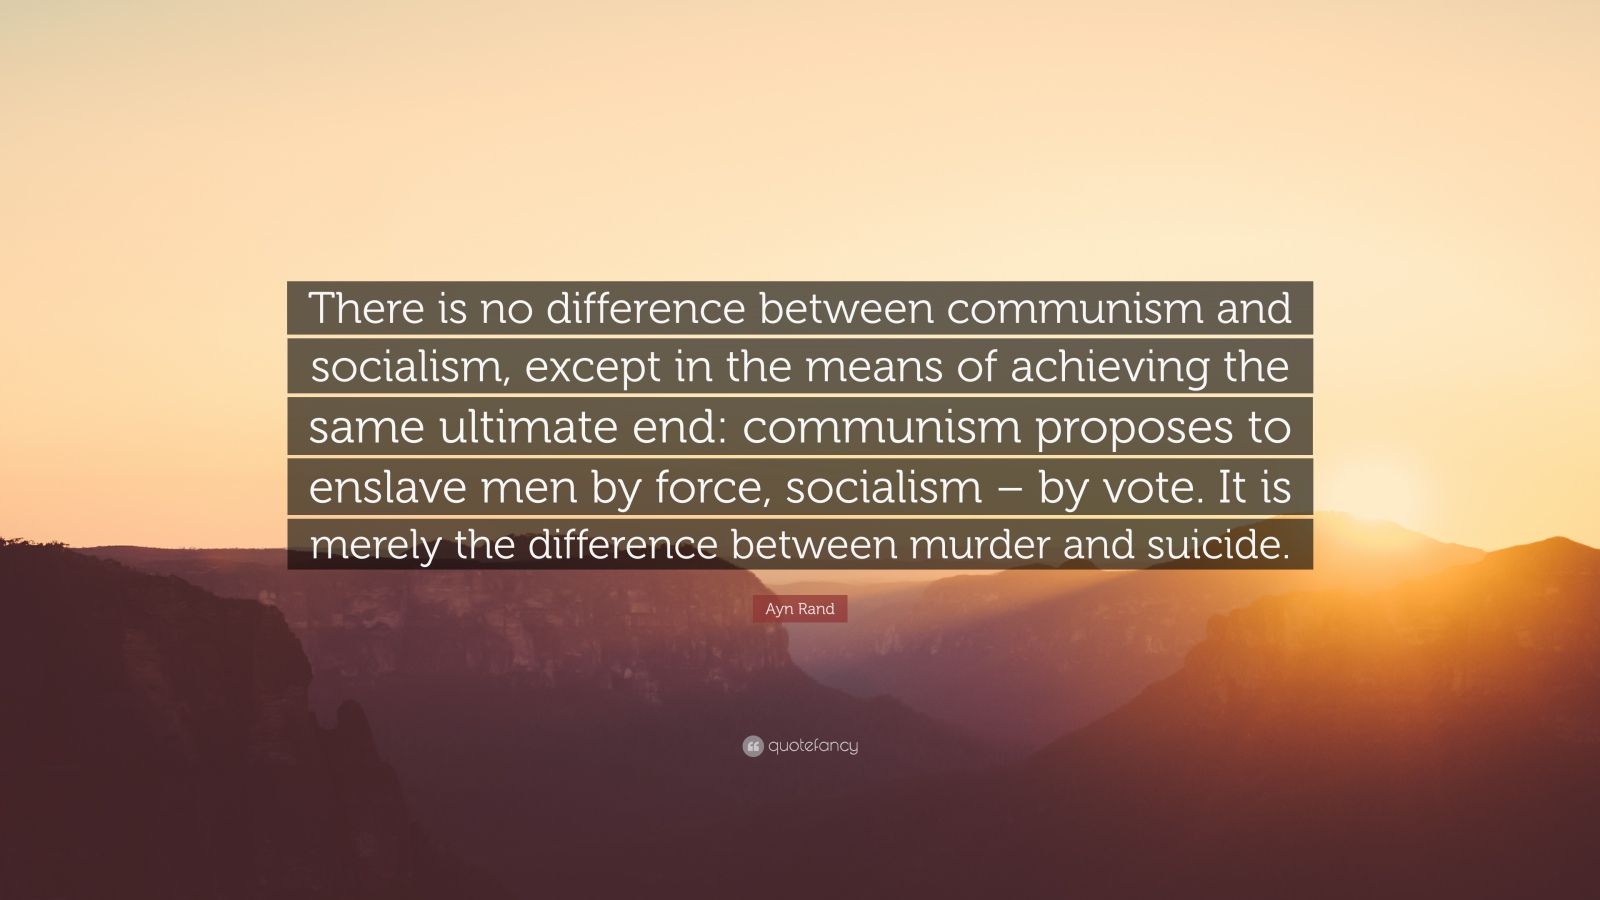 Ayn Rand Quote: “There is no difference between communism and socialism